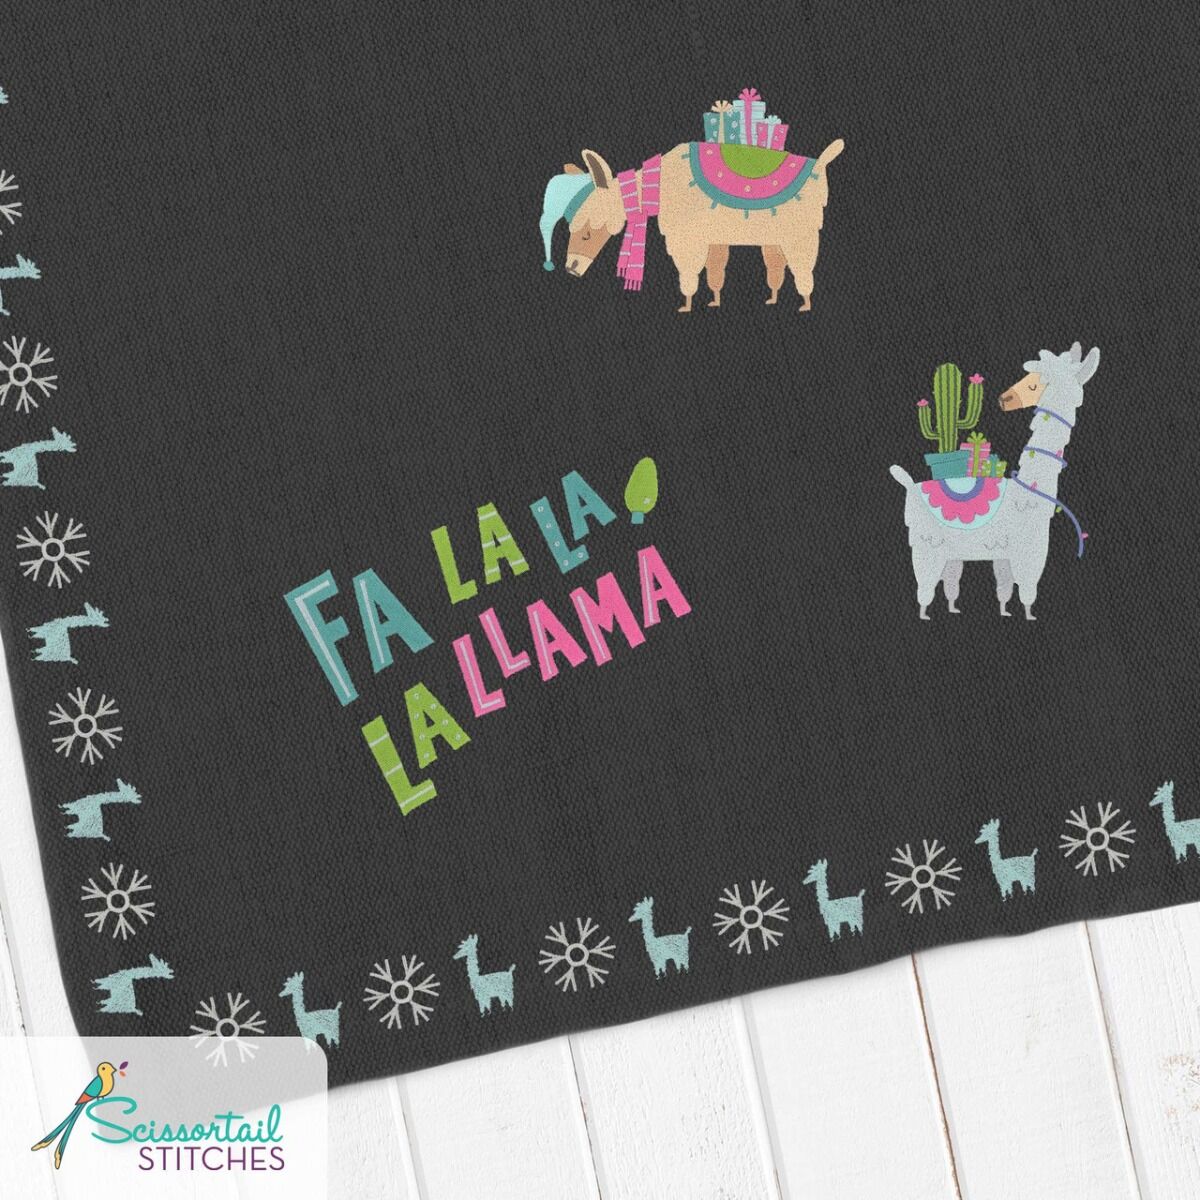 OESD Happy Llama Days Embroidery Collection by Ammie Gomez
,OESD Happy Llama Days Embroidery Collection by Ammie Gomez
,OESD Happy Llama Days Embroidery Collection by Ammie Gomez
,OESD Happy Llama Days Embroidery Collection by Ammie Gomez
